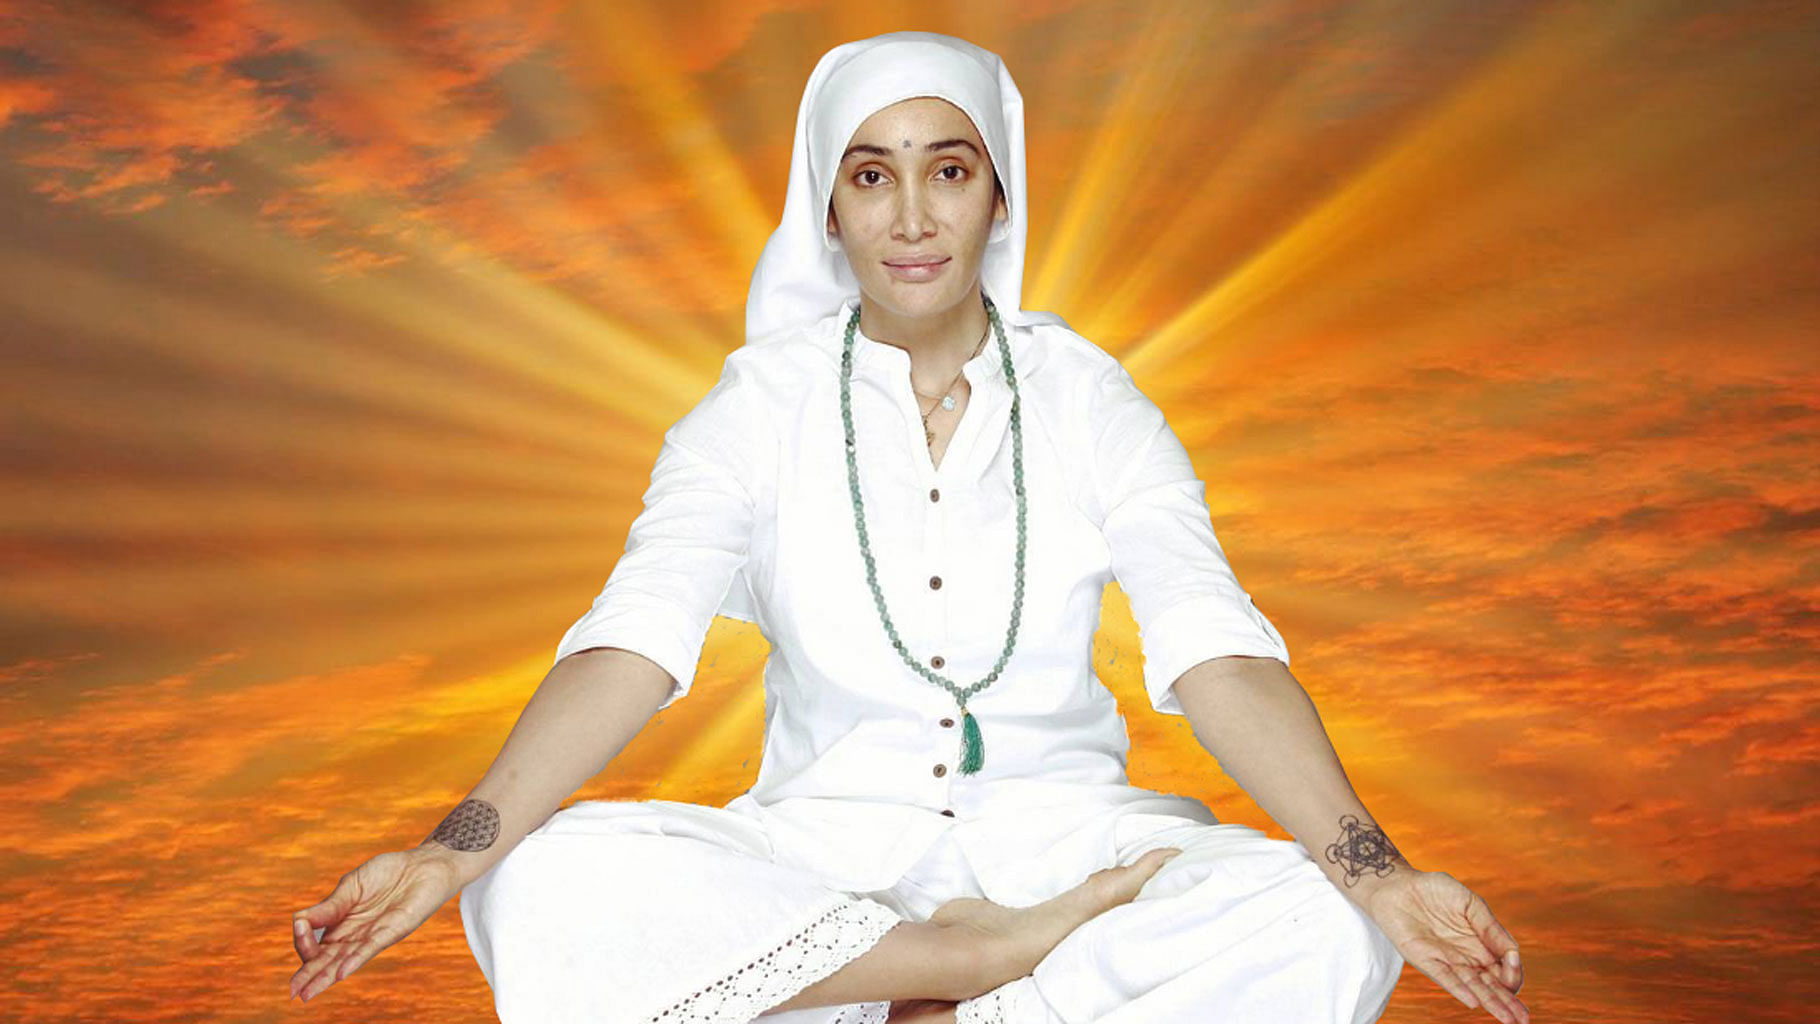 Welcome to the universe of Gaia Mother Sofia (Photo courtesy:<a href="https://www.instagram.com/p/BG58XUDmZO7/?taken-by=sofiahayat&amp;hl=en"> Instagram/@sofiahayat</a>; altered by the Quint)